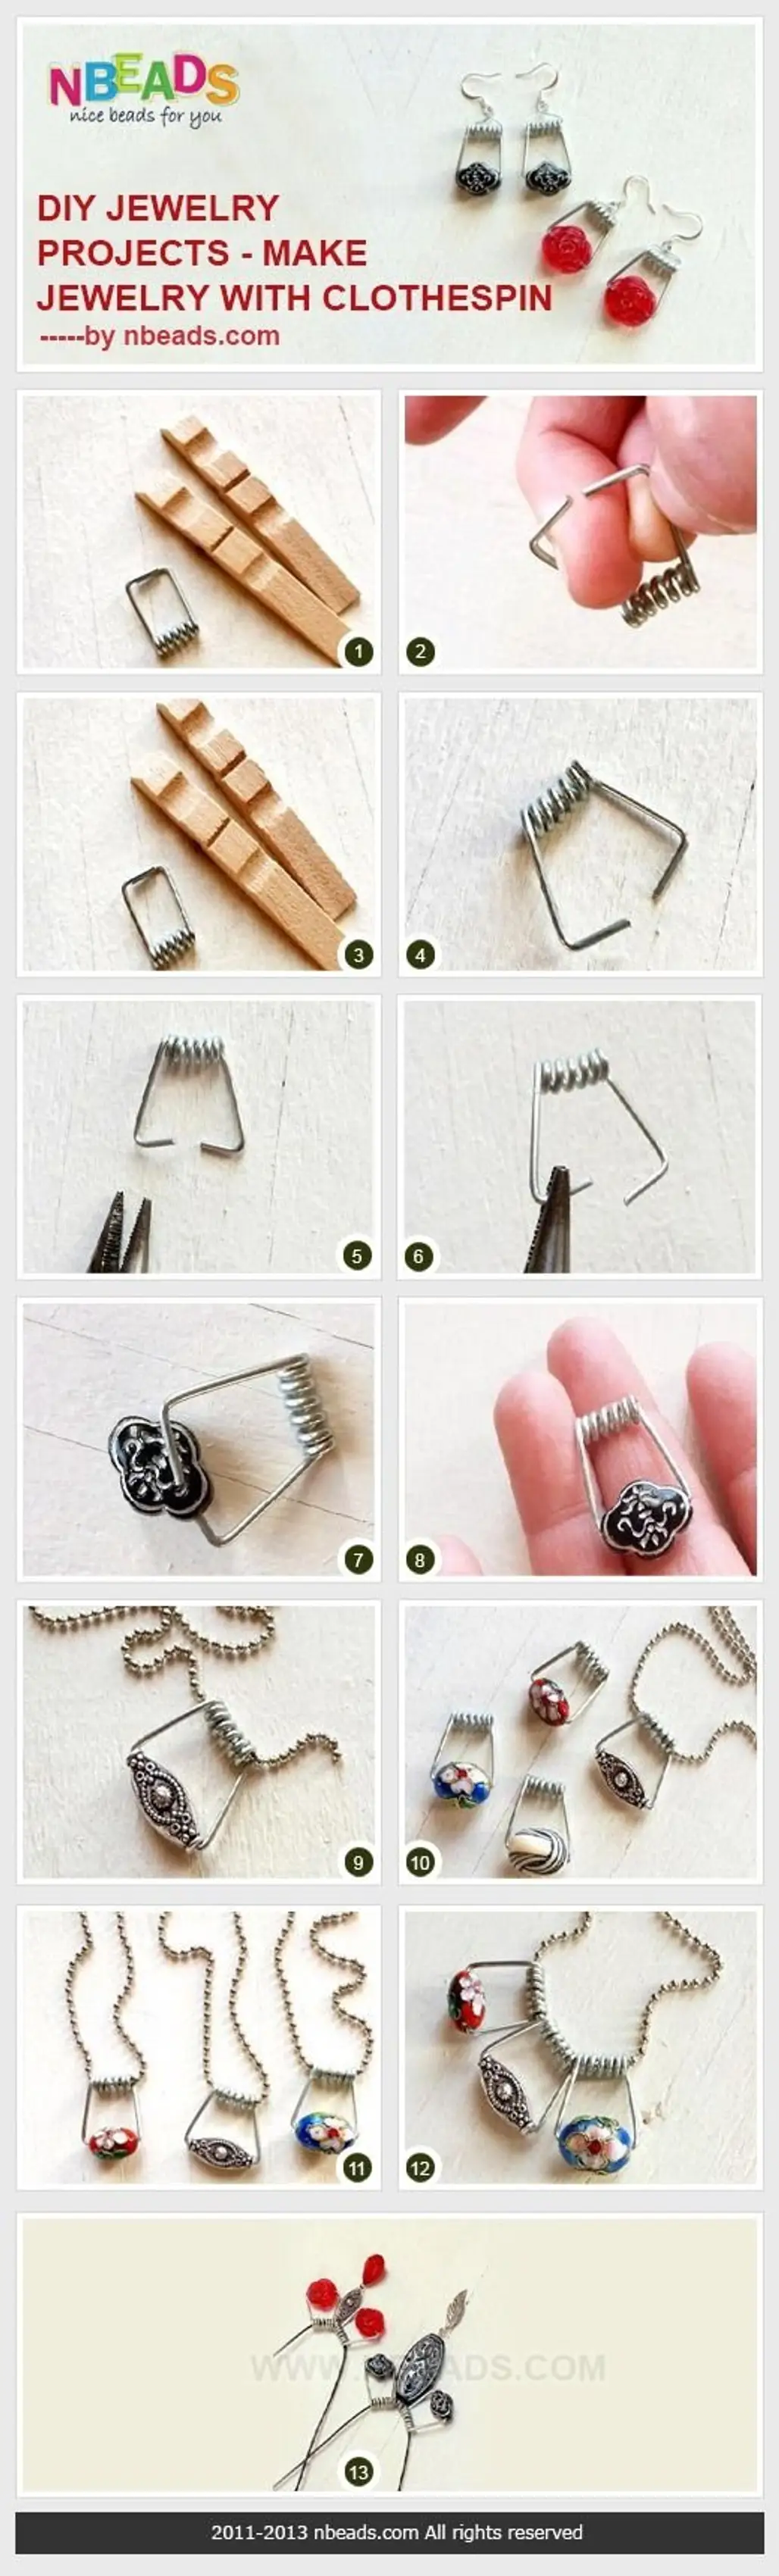 Clothespin Jewelry